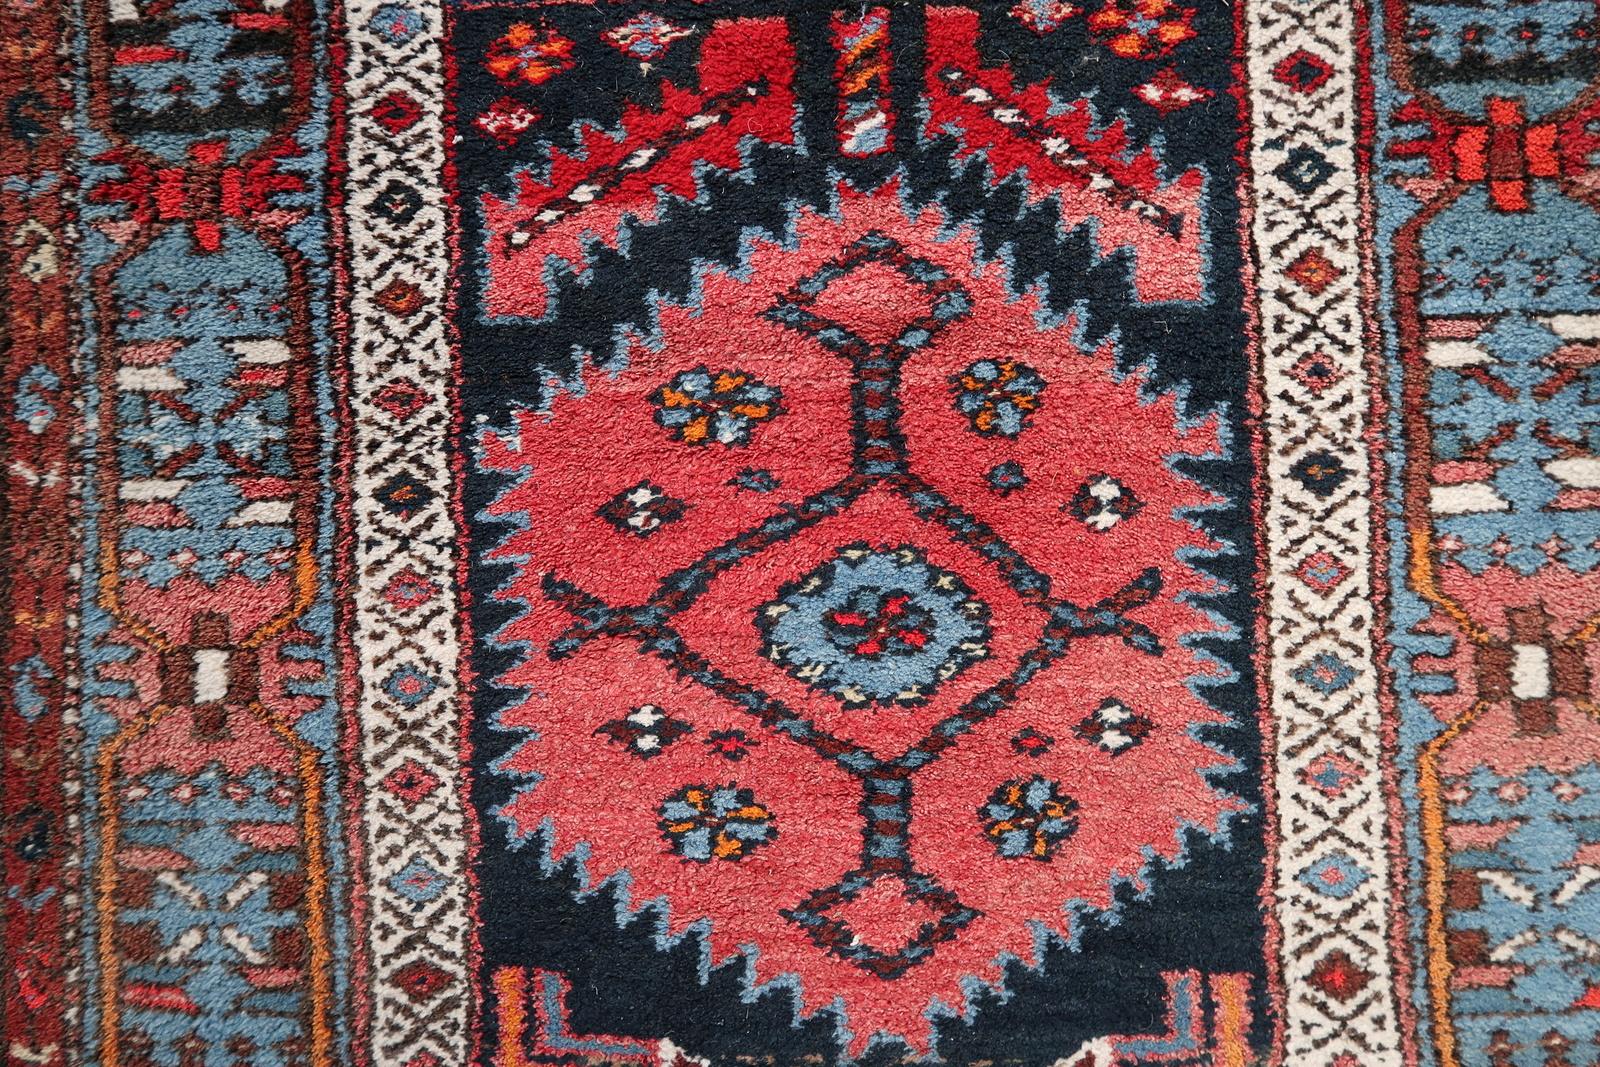 Early 20th Century Handmade Antique Persian Style Hamadan Runner Rug 3.4' x 7.7, 1920s - 1C1104 For Sale